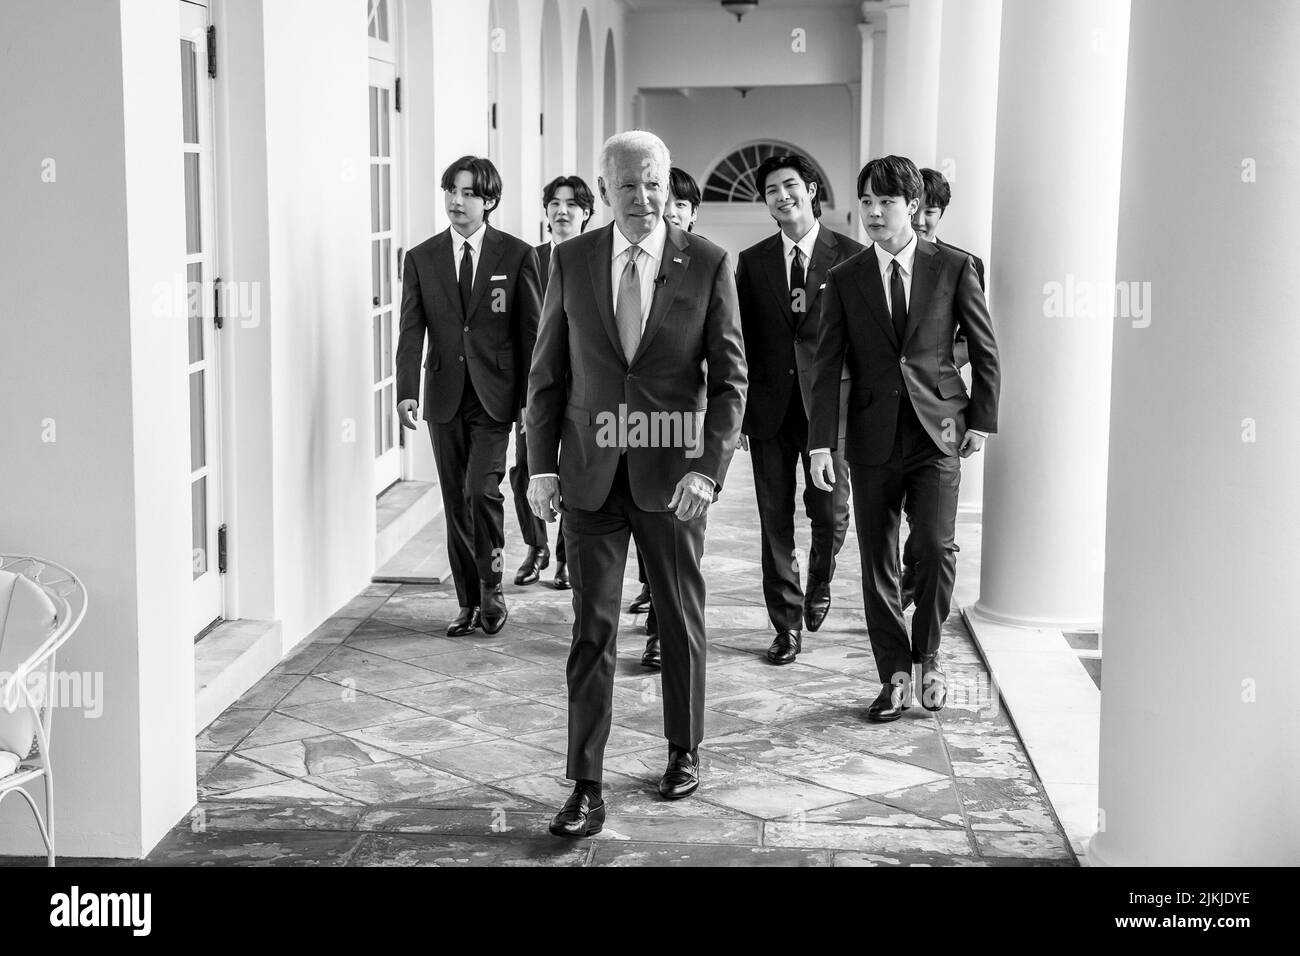 President Joe Biden walks with the K-pop singing group BTS Tuesday, May 31, 2022, along the Colonnade of the White House to the Oval Office.  (Official White House Photo by Adam Schultz) Stock Photo